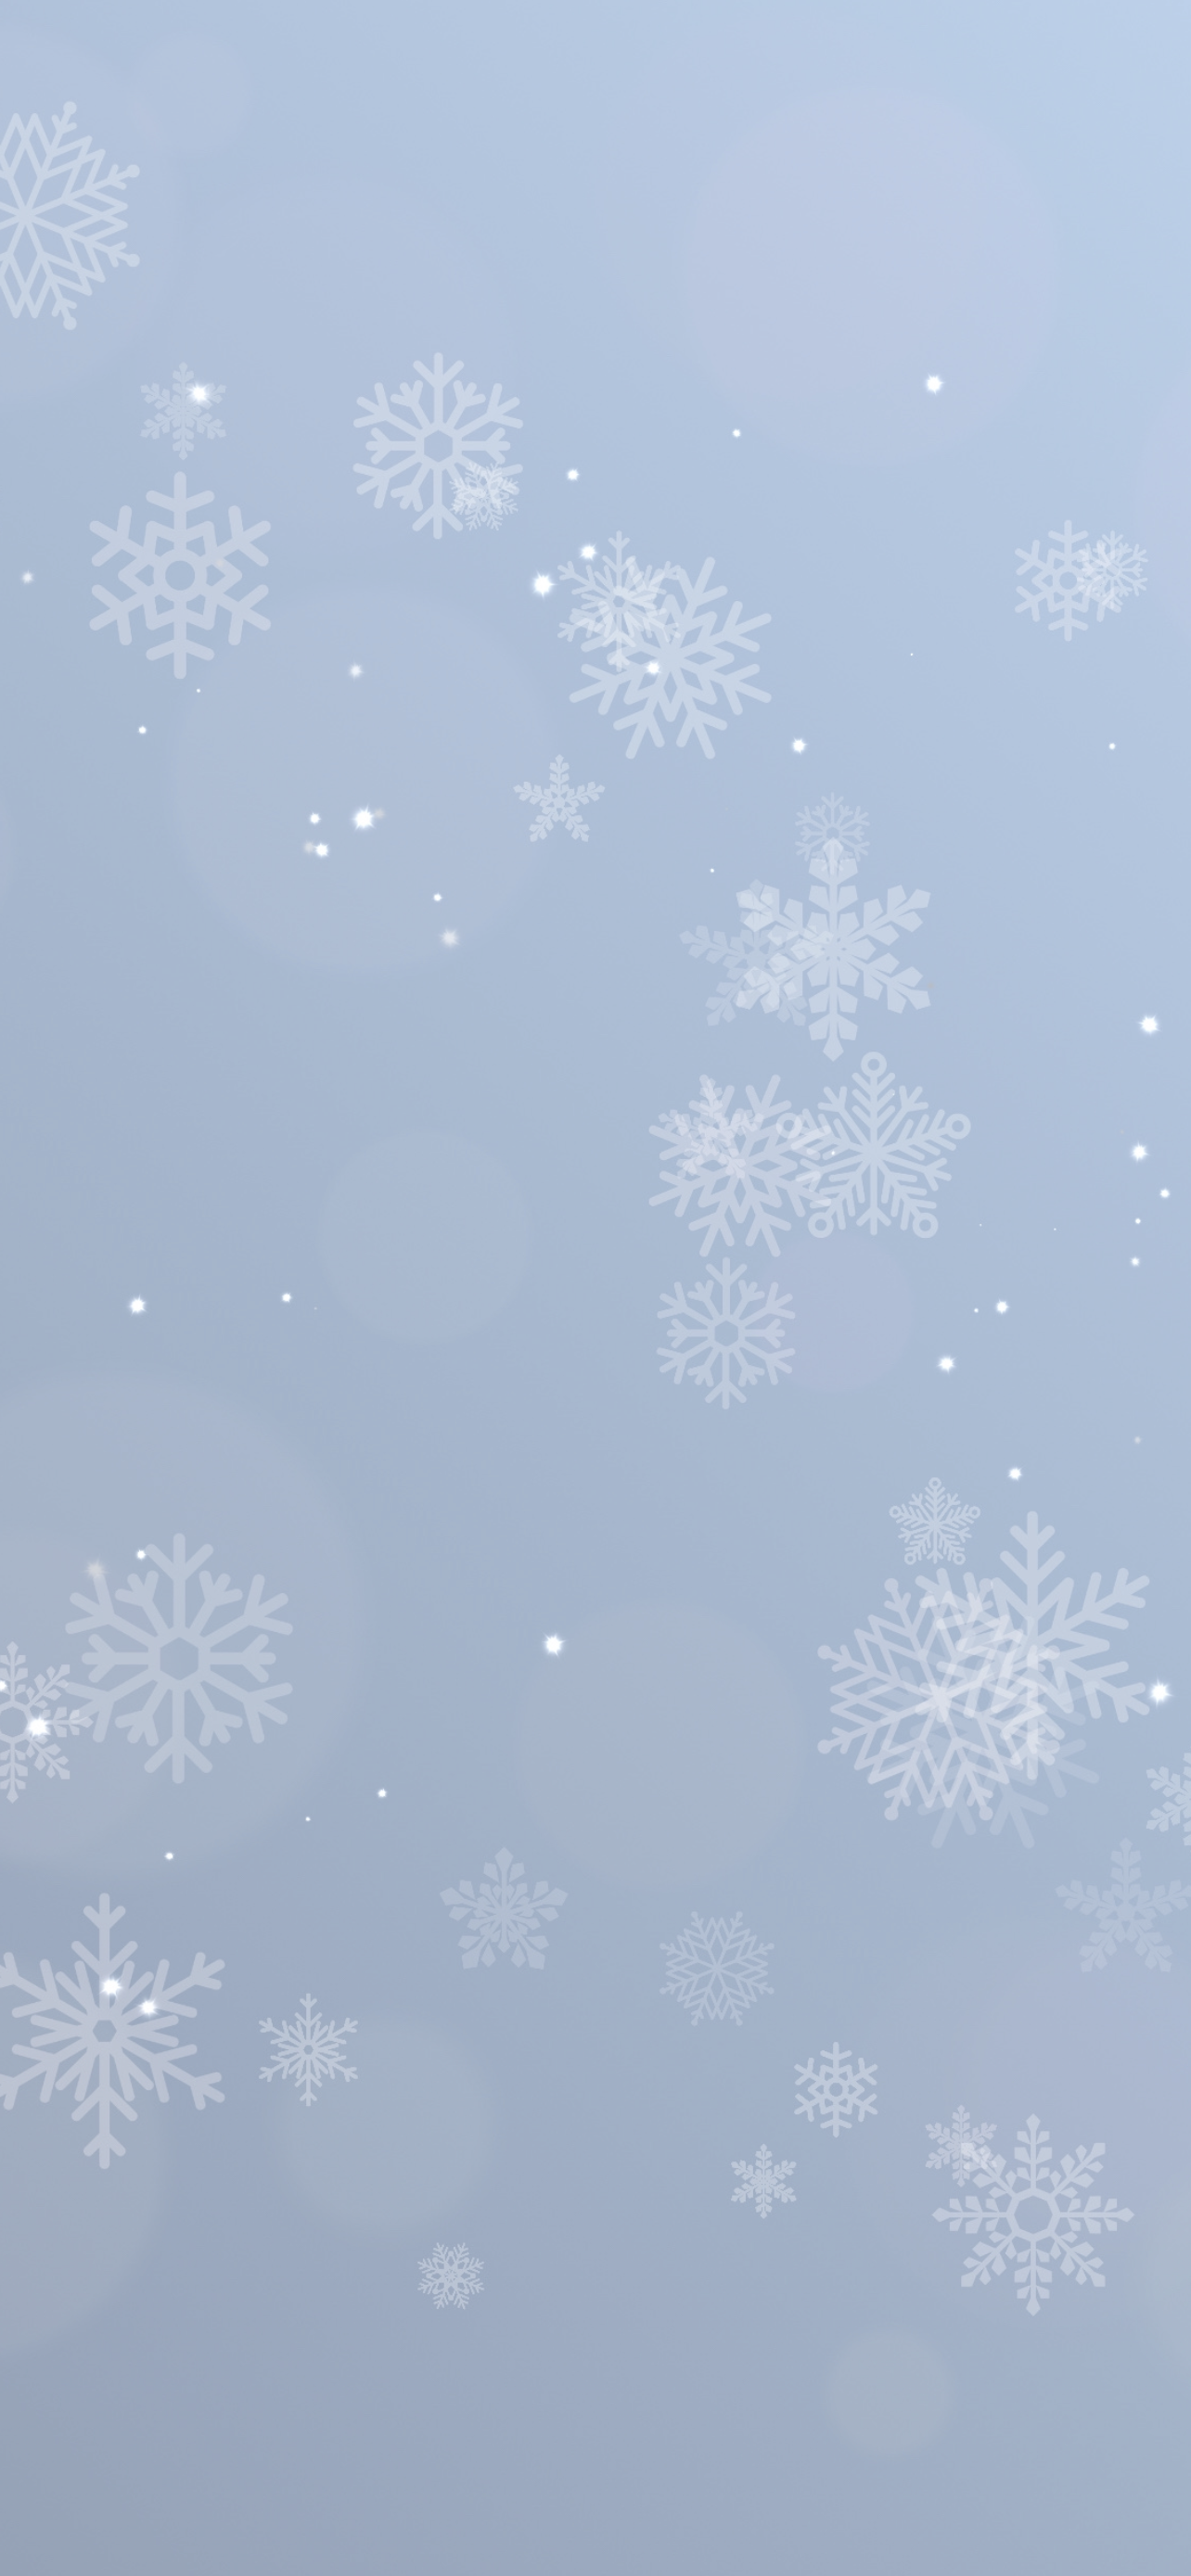 Falling snowflakes wallpapers to match iphone pro colors